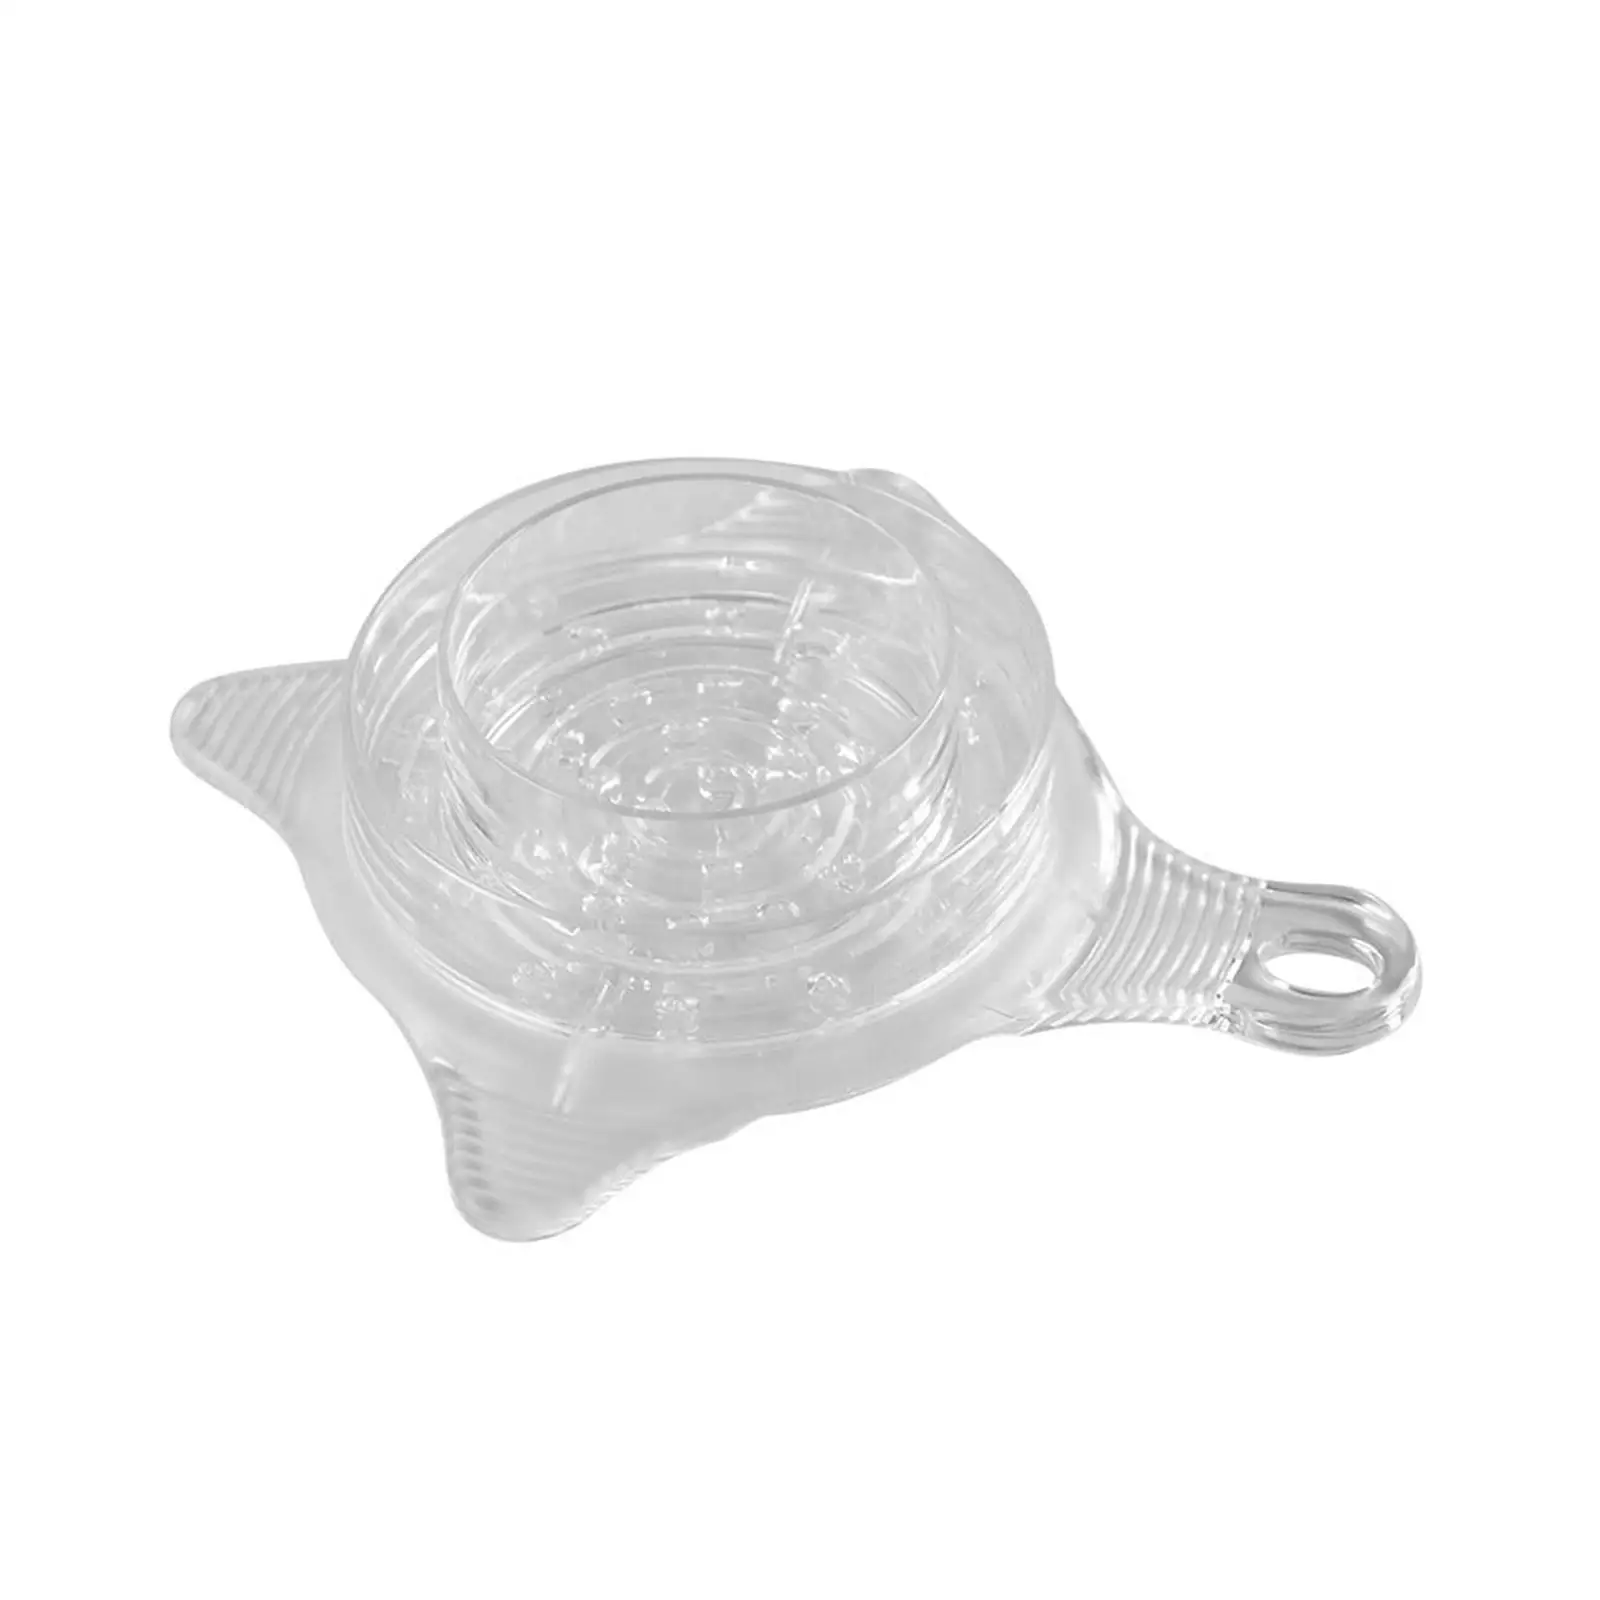 Coffee Filter Transparent Accessories Practical Portable Reusable Coffee Portafilter for Camping Home Office Gadgets